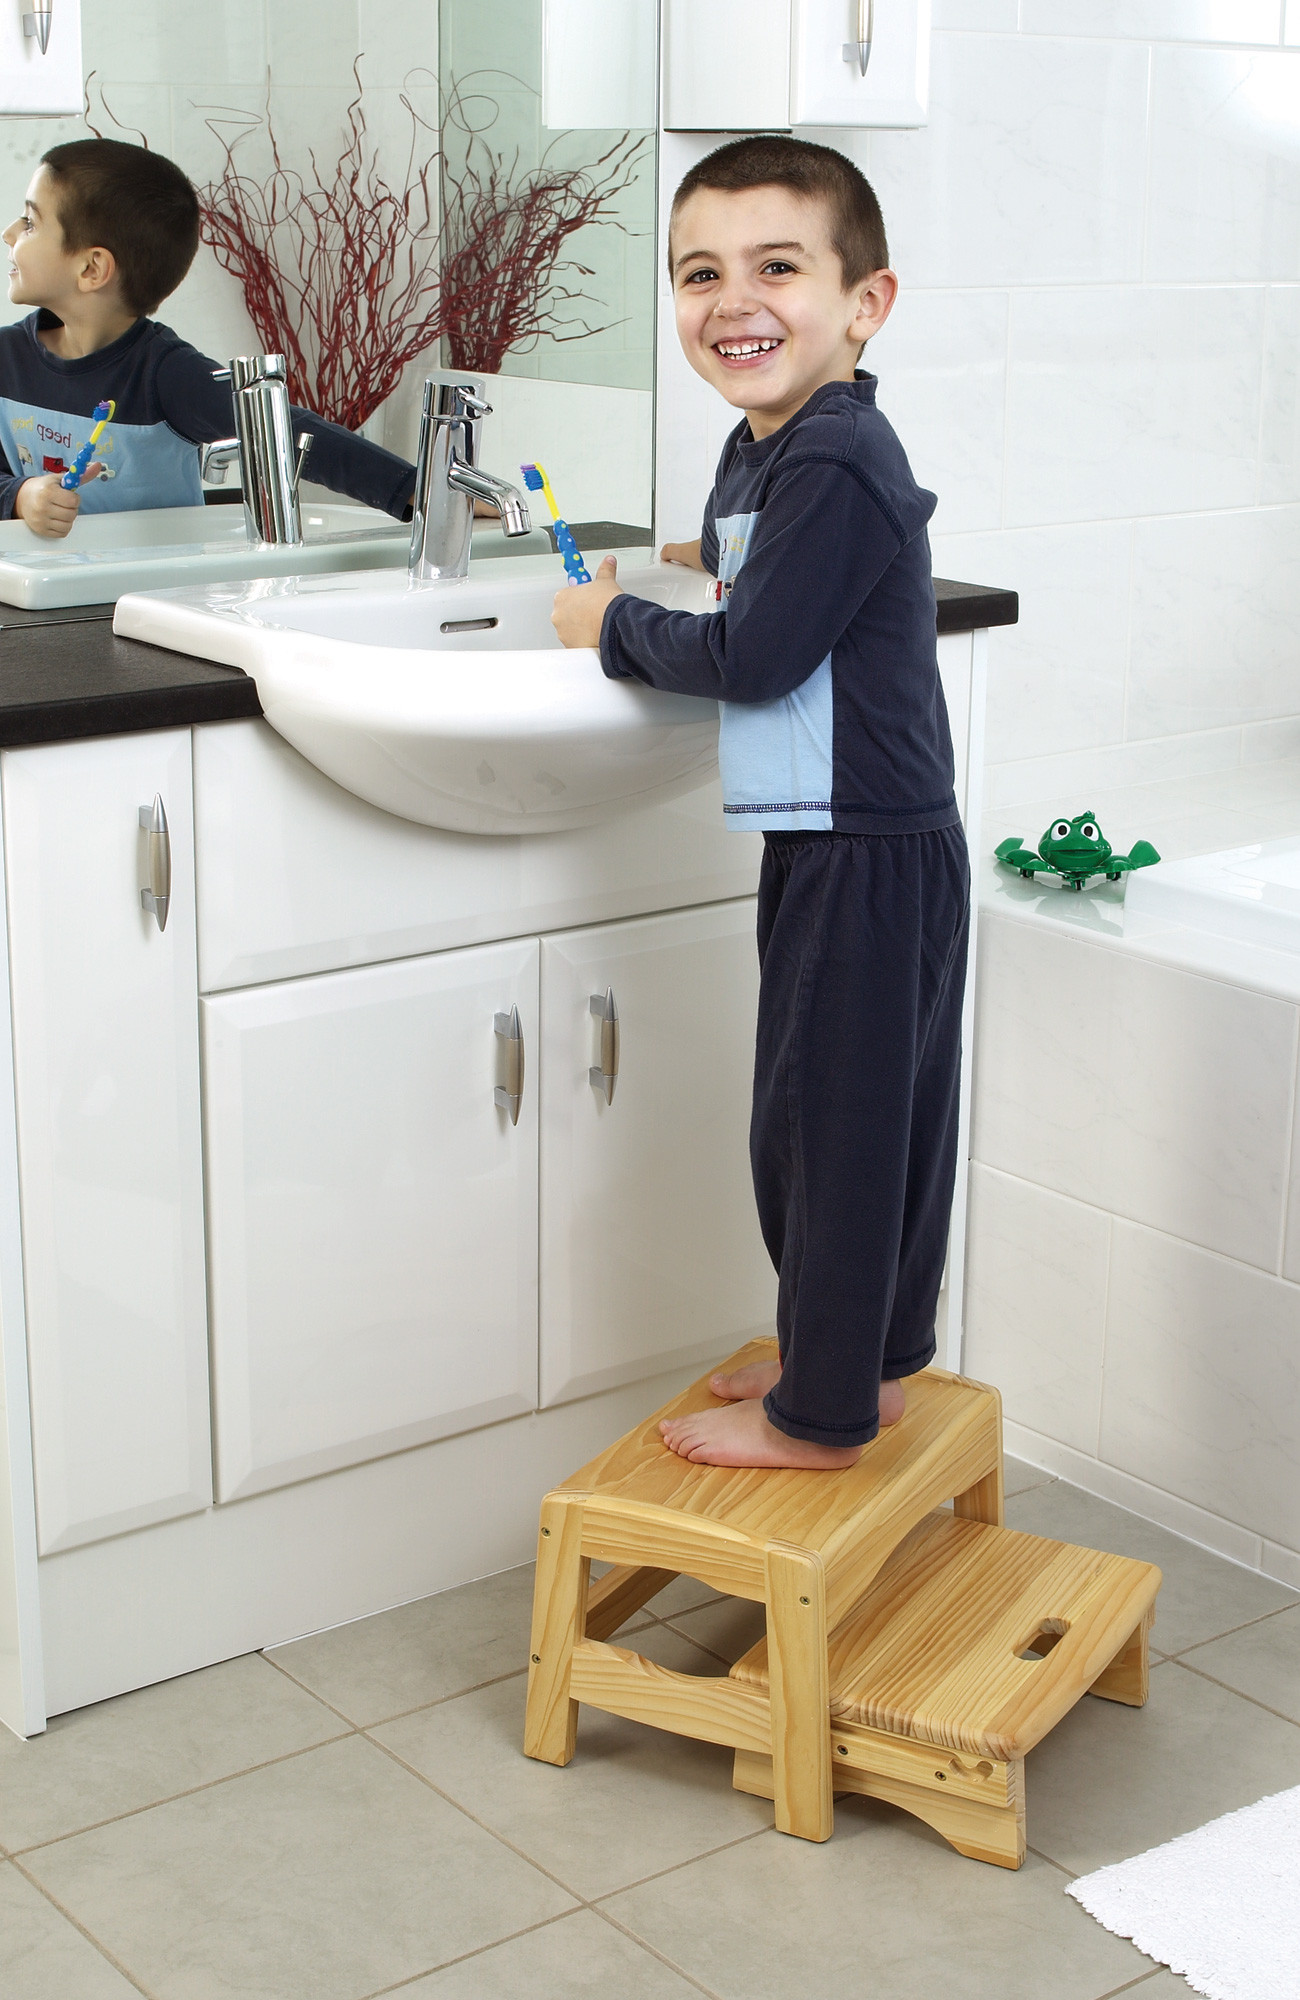 Kids Bathroom Step Stool
 Safety 1st Wooden Two Step Stool Baby Kid Bathroom Potty